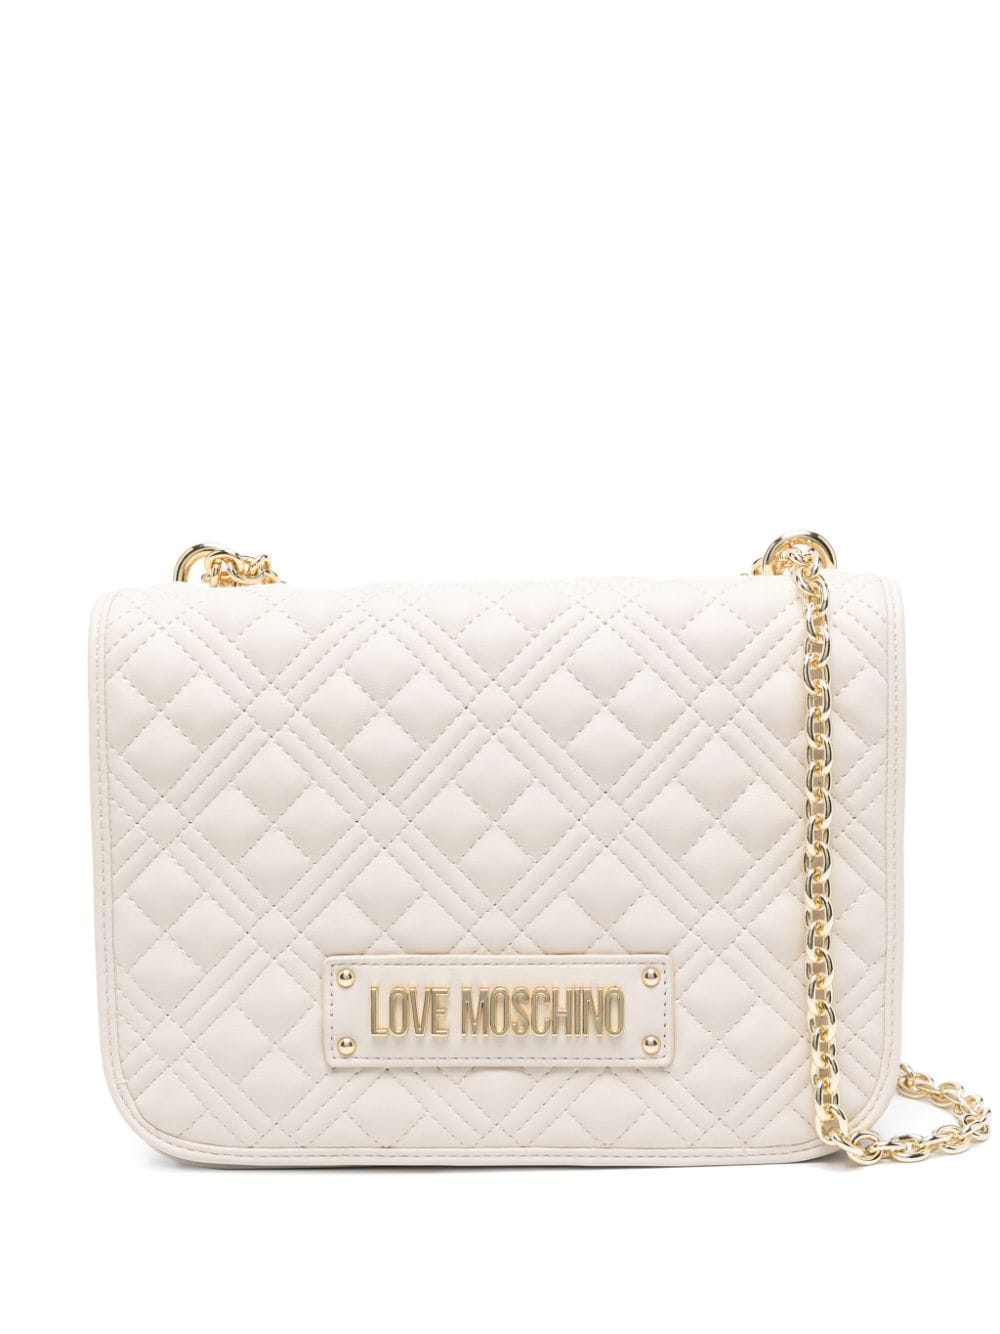 Love Moschino quilted shoulder bag - Toni neutri